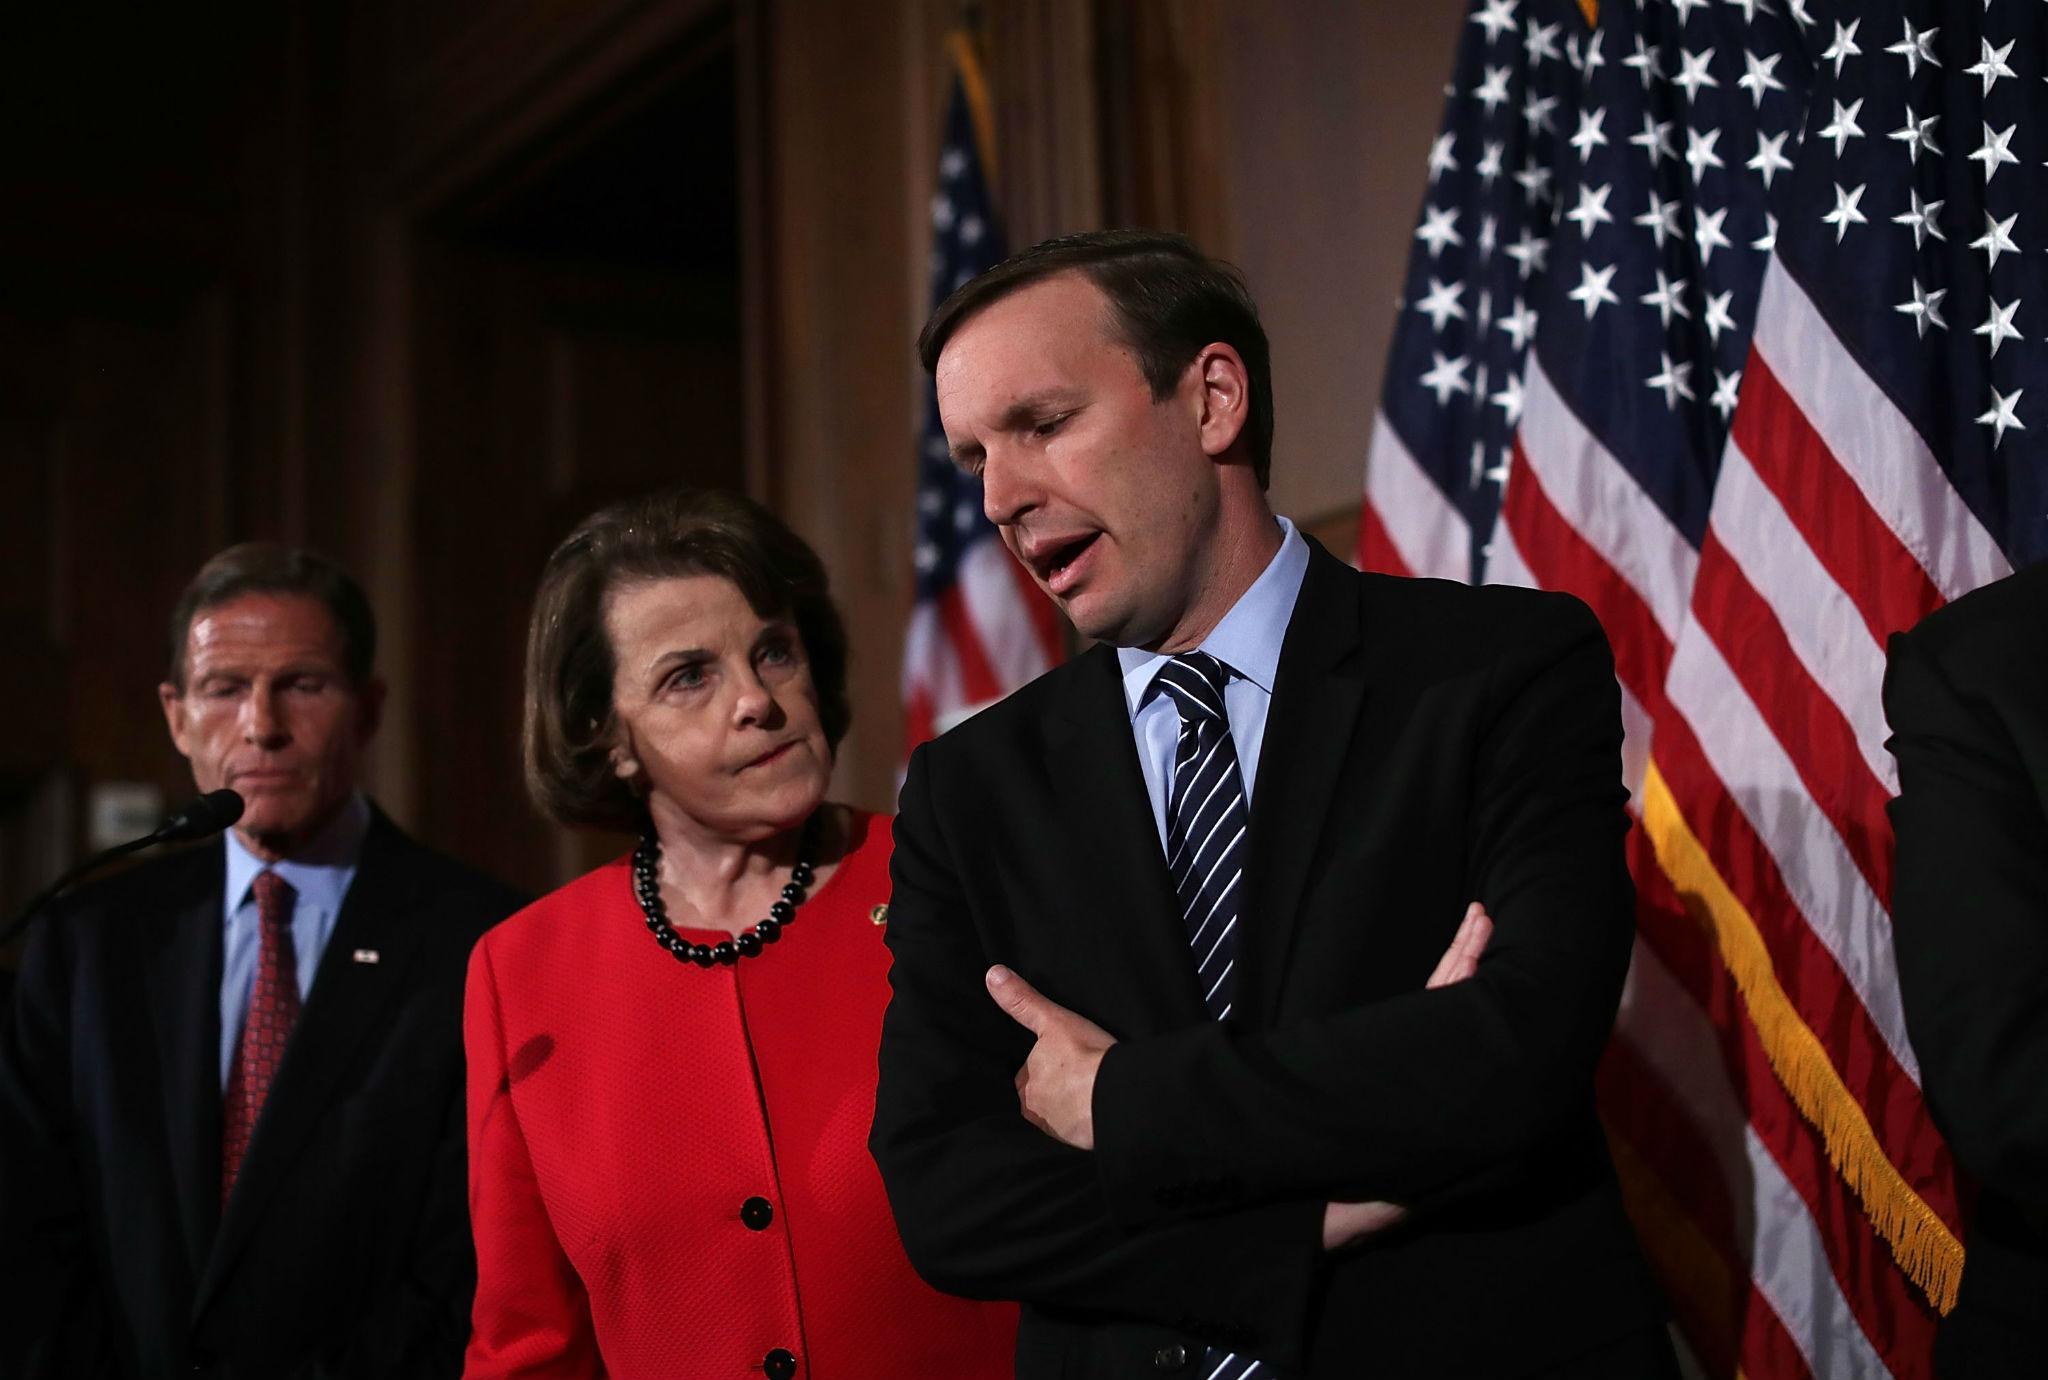 Democratic Senators Dianne Feinstein and Chris Murphy confer at a press conference on 20 June, when their proposals for new gun control measures were rejected by the Republican-held Senate